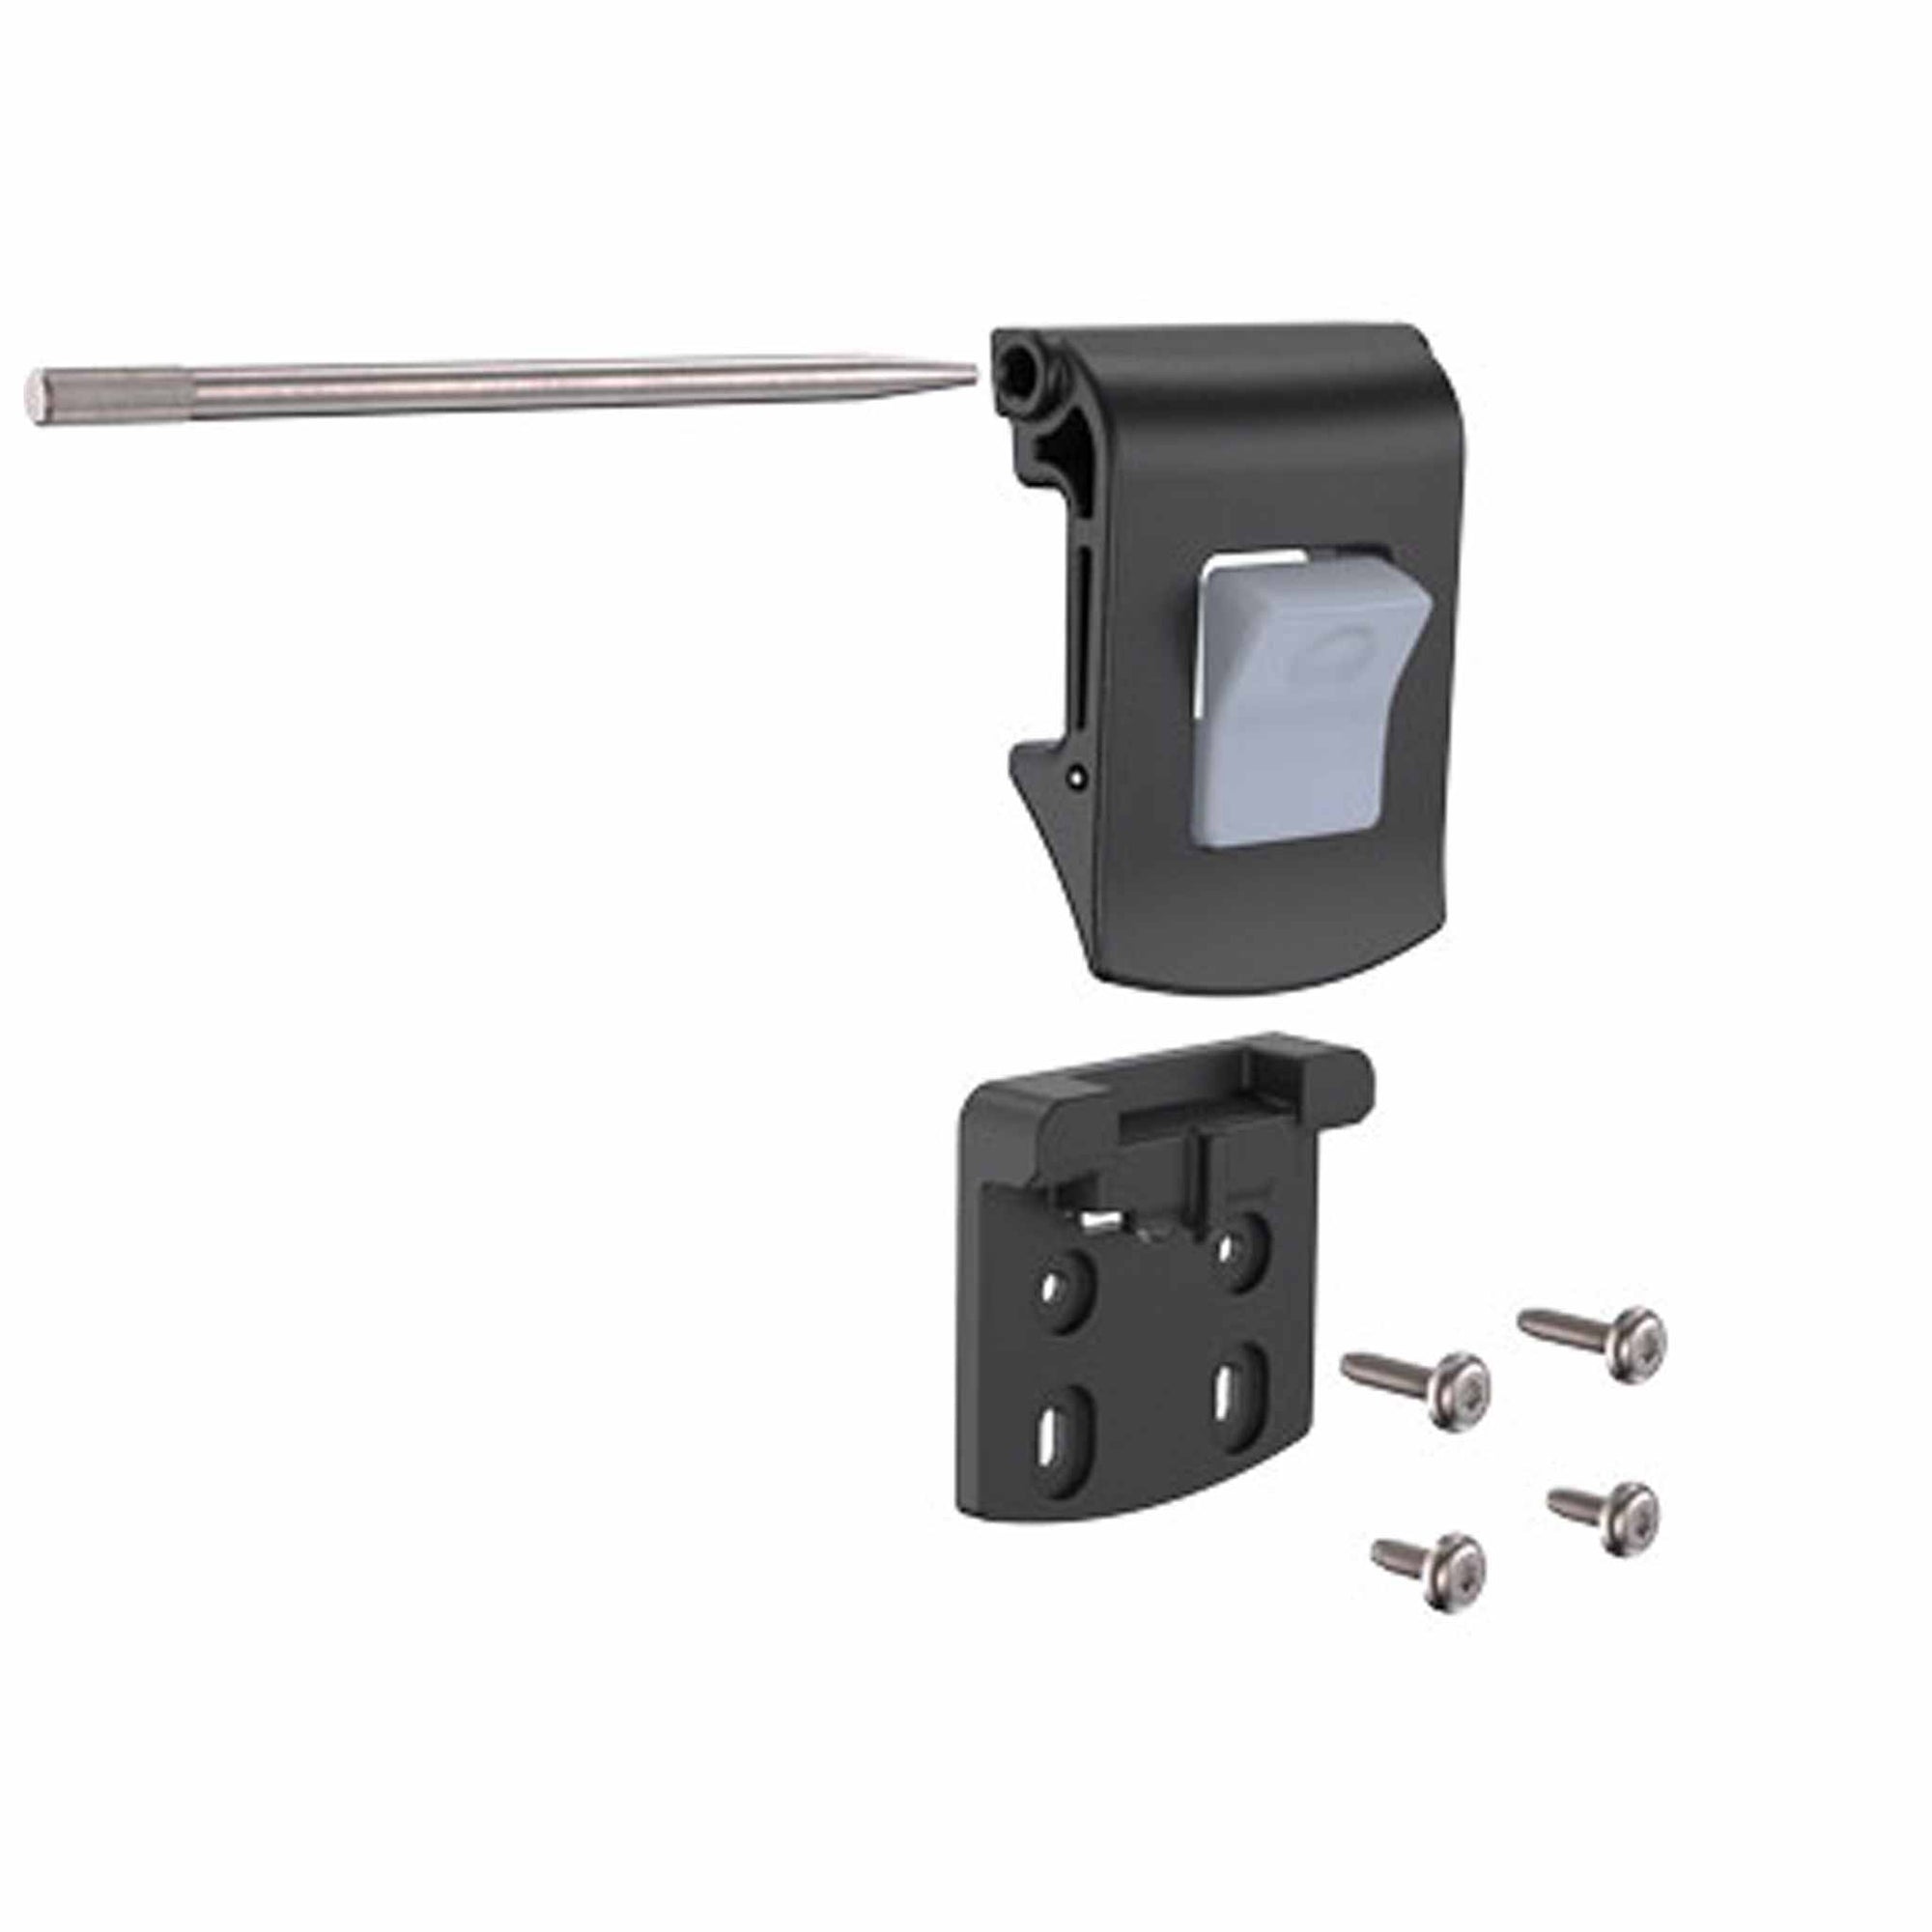 Replacement Roto Pin & Screw Latch in grey